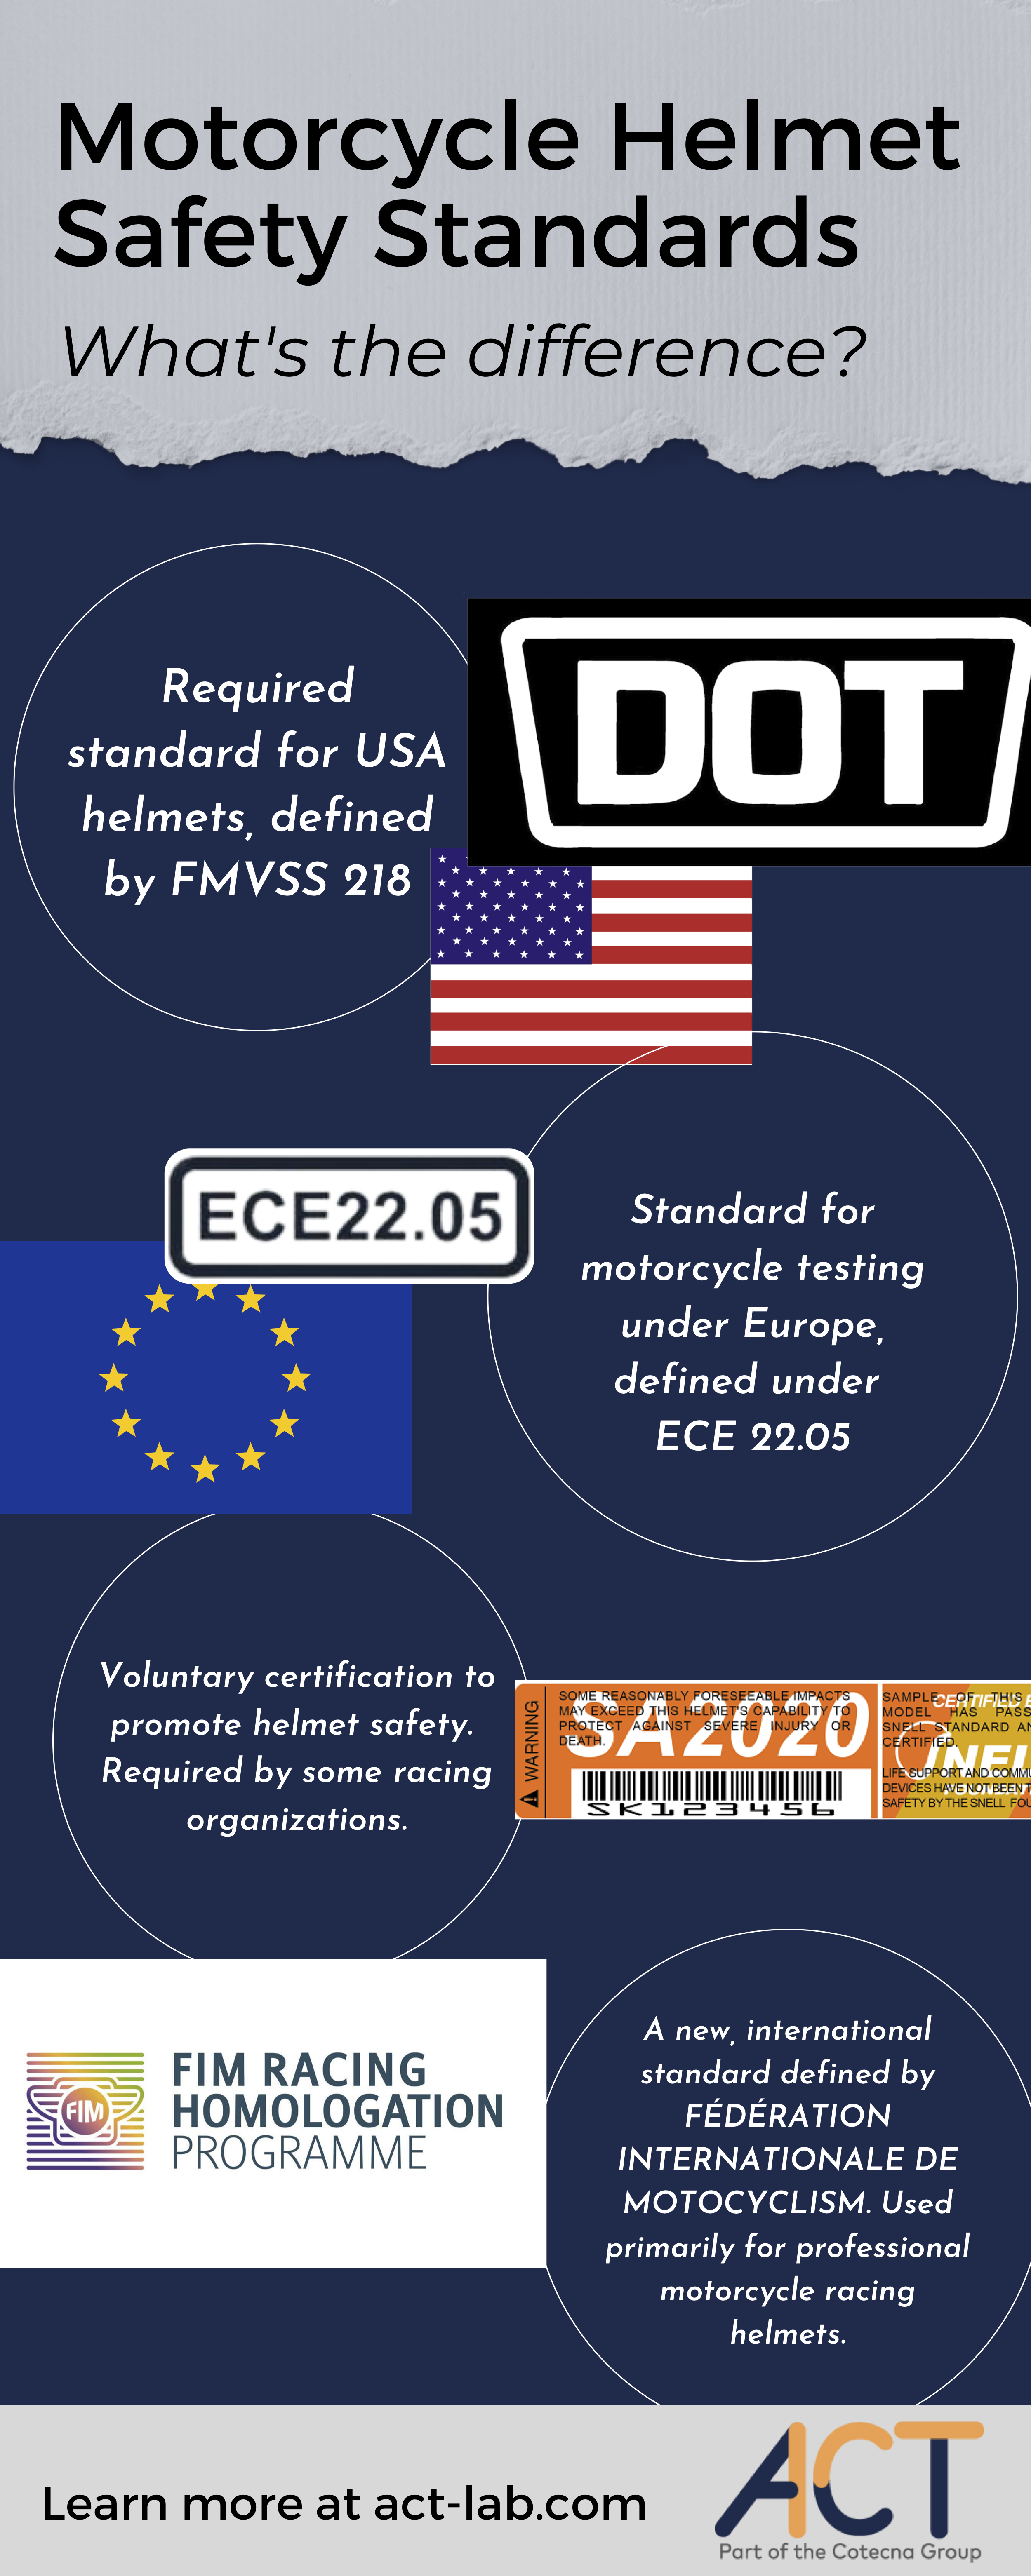 I. Introduction to Motorcycle Helmet Safety Standards